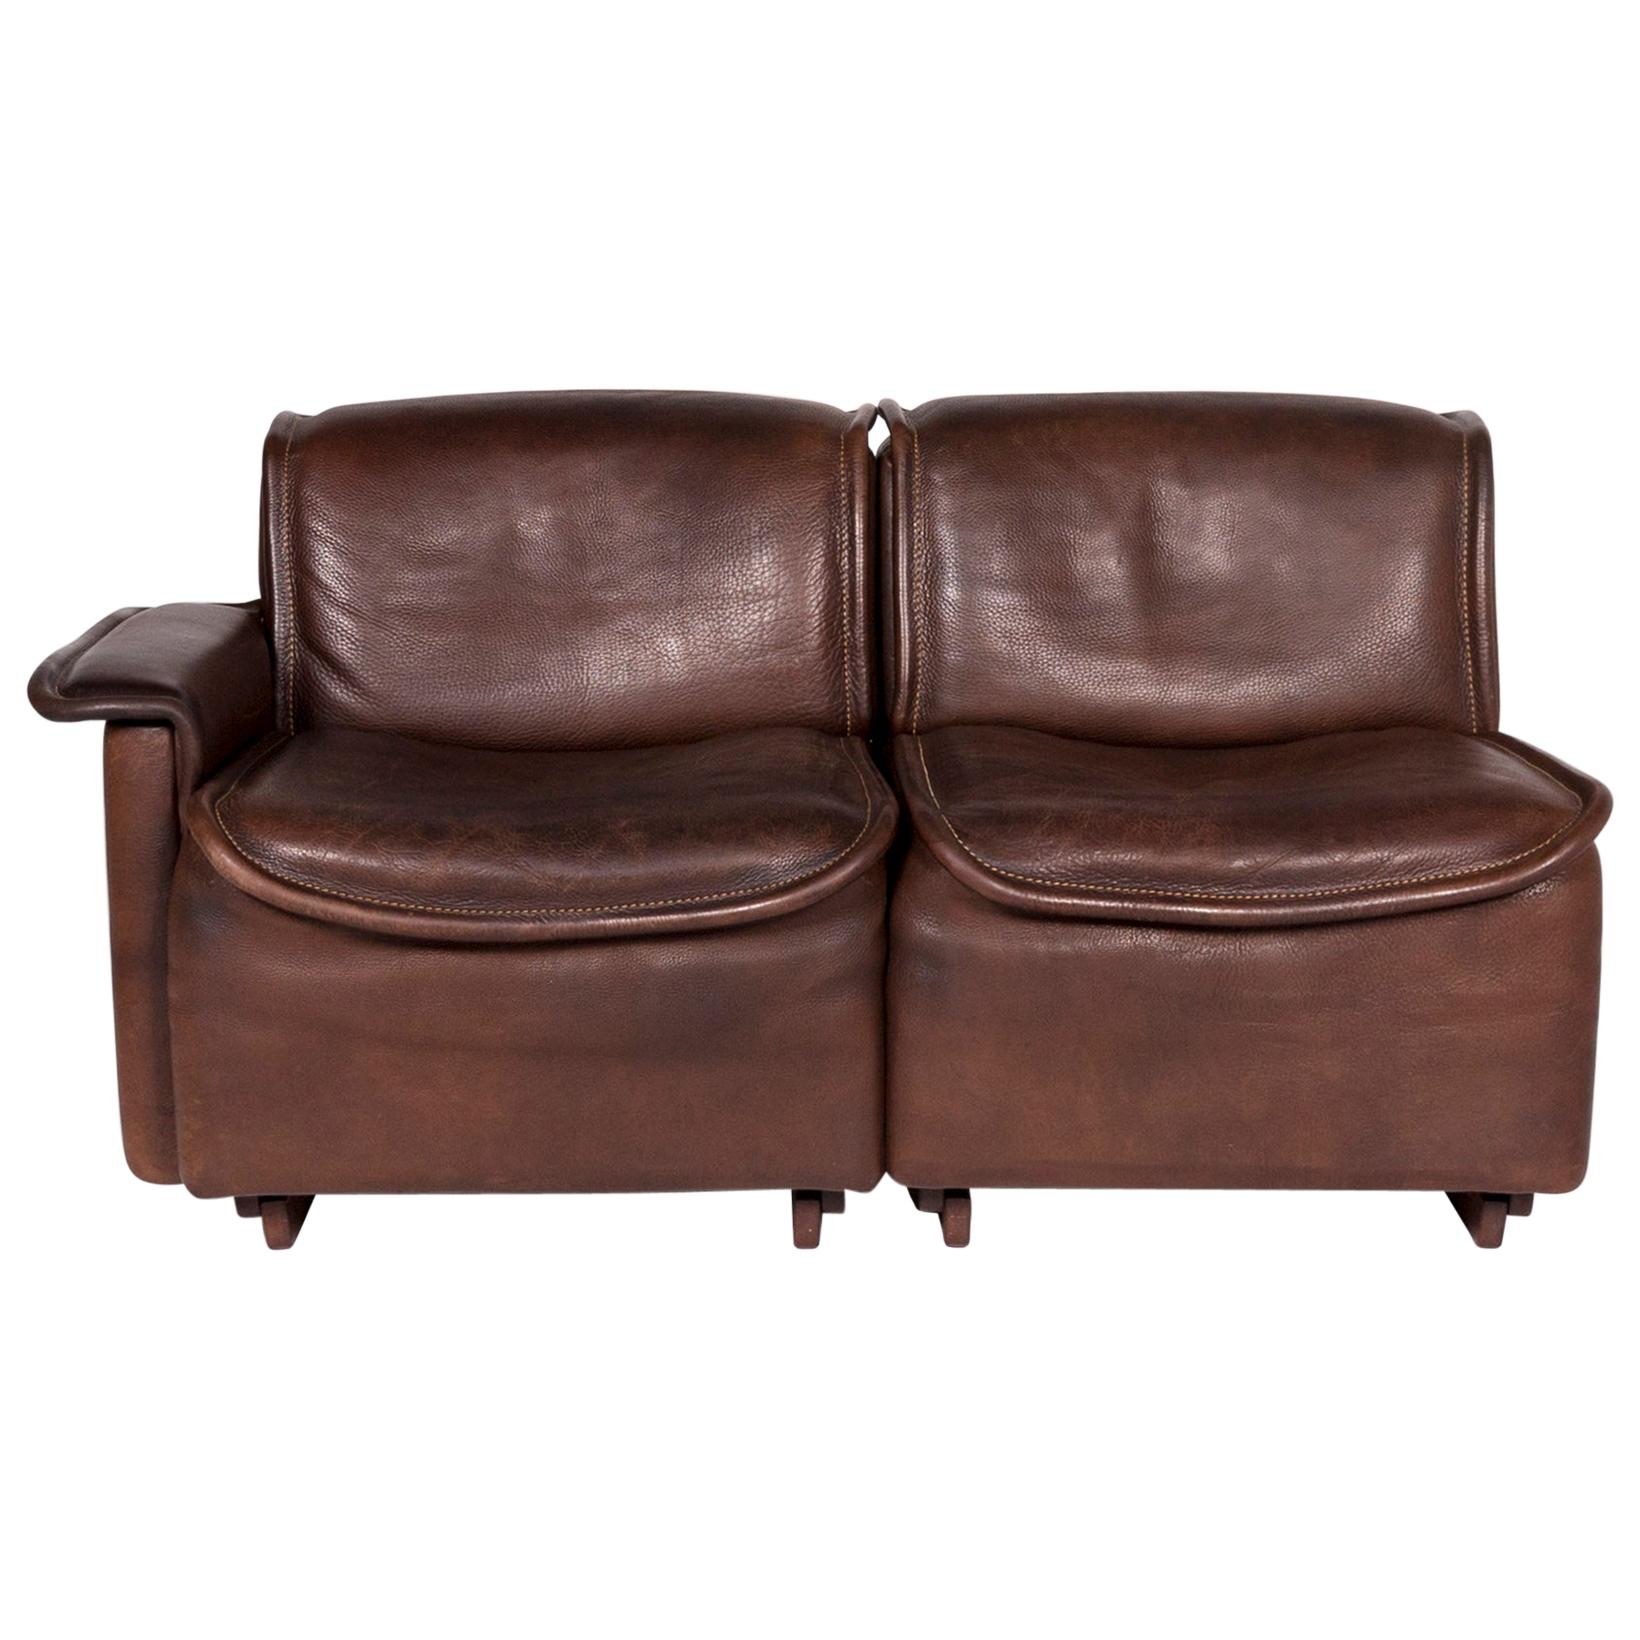 De Sede DS 12 Leather Sofa Brown Two-Seat Couch For Sale